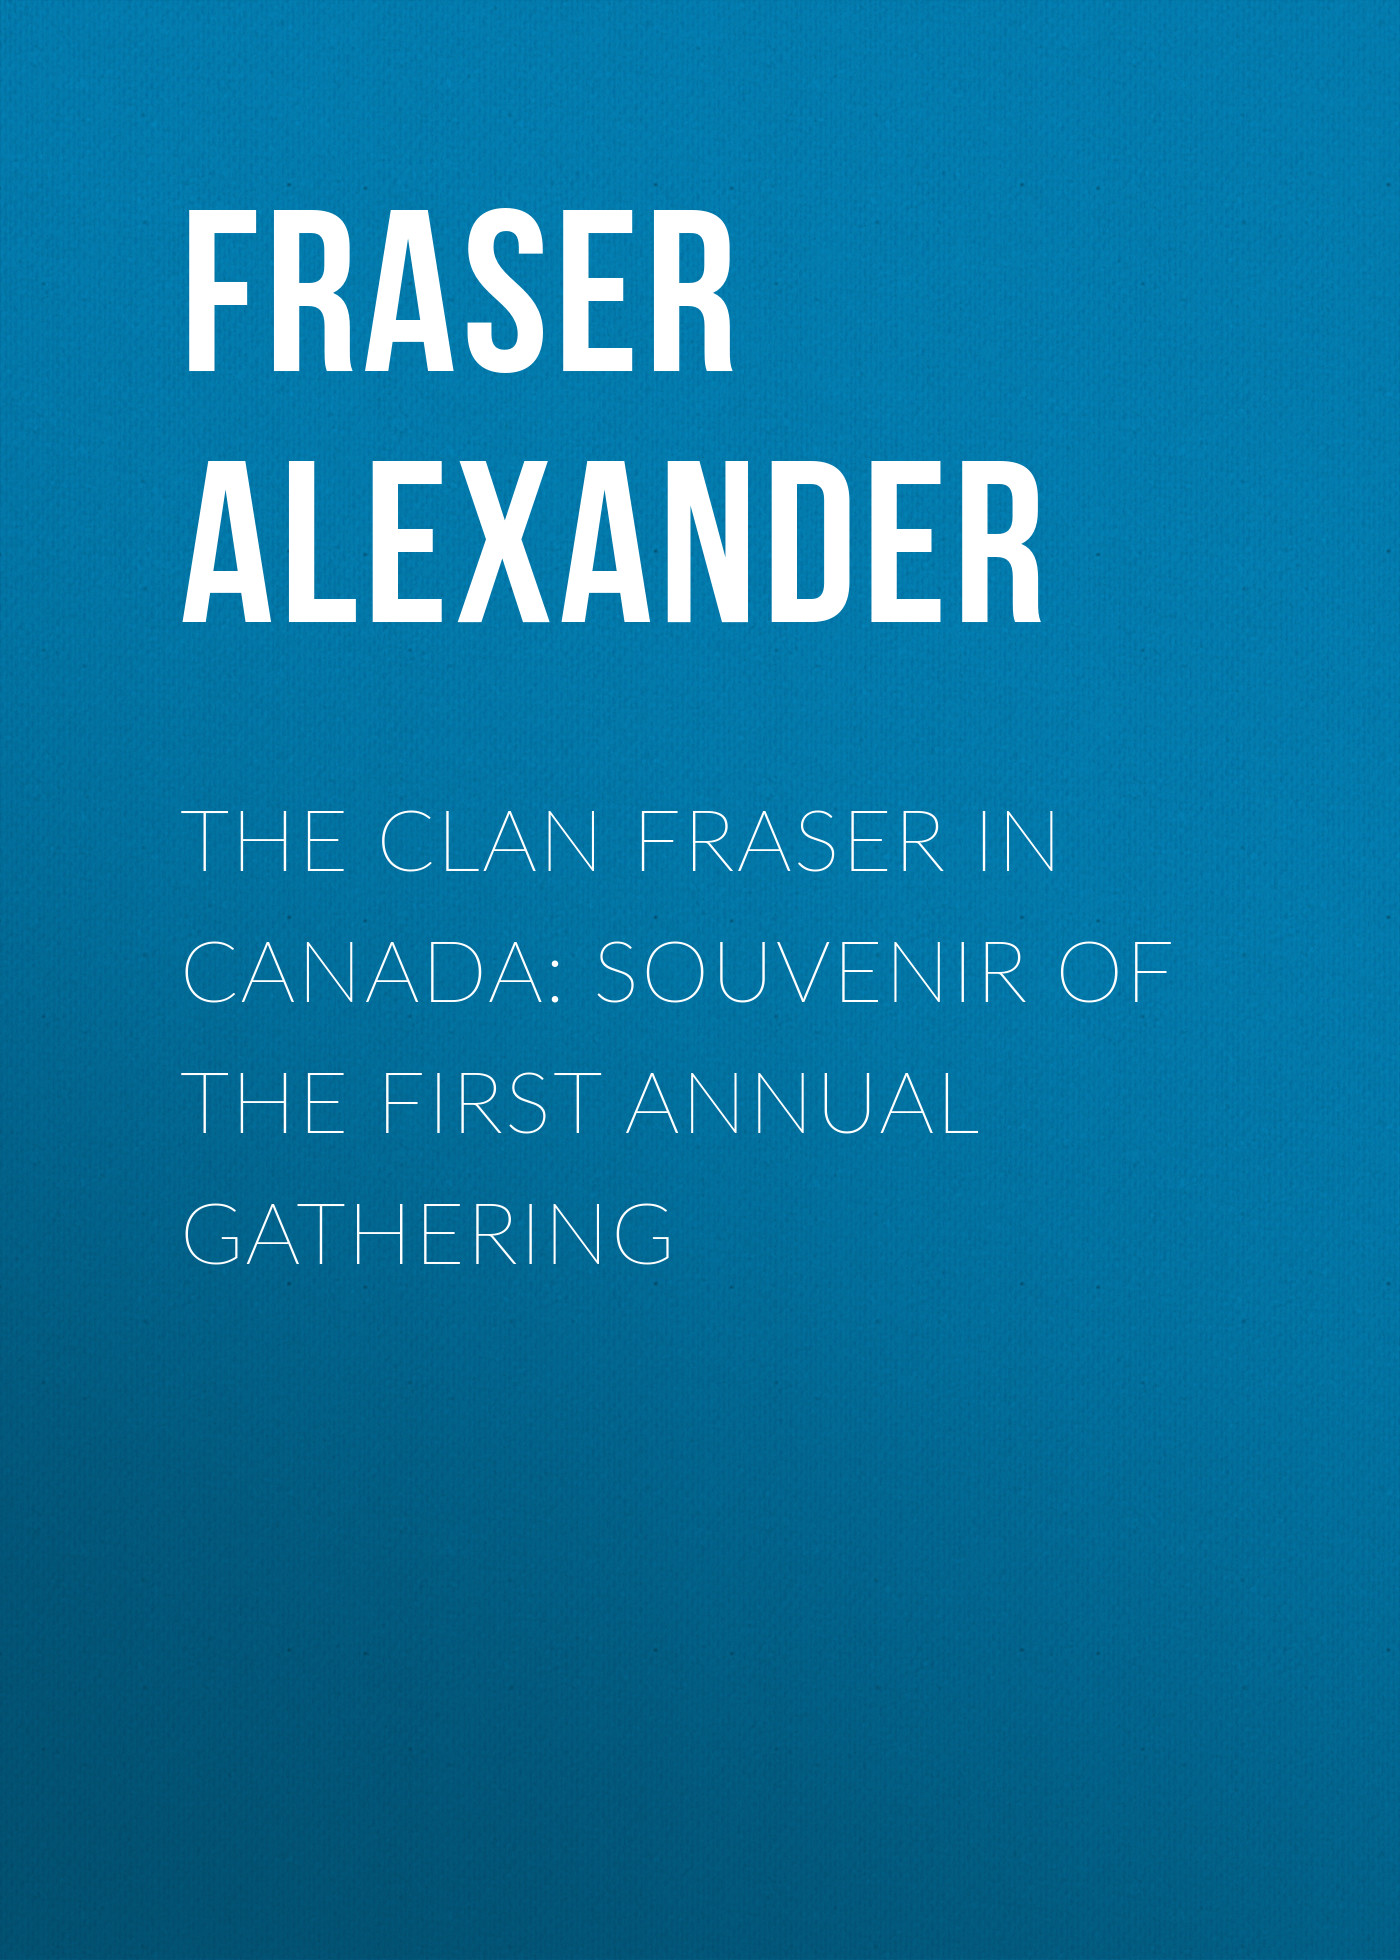 Fraser Alexander The Clan Fraser in Canada: Souvenir of the First Annual Gathering